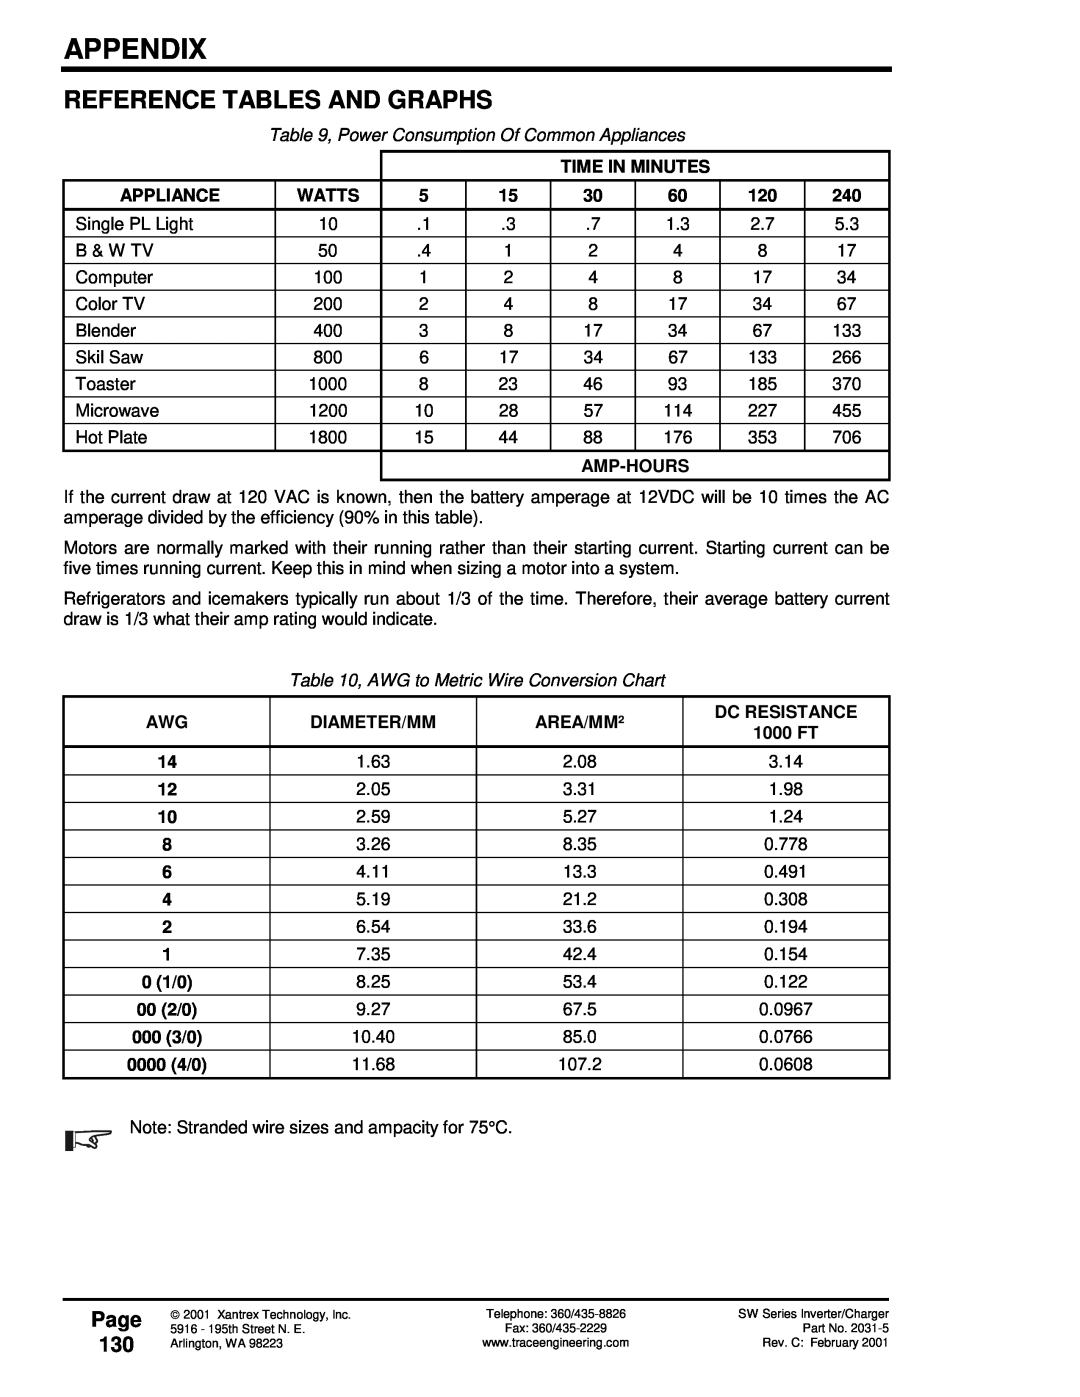 Xantrex Technology 120 VAC/60 Reference Tables And Graphs, Page 130, Power Consumption Of Common Appliances, Watts 